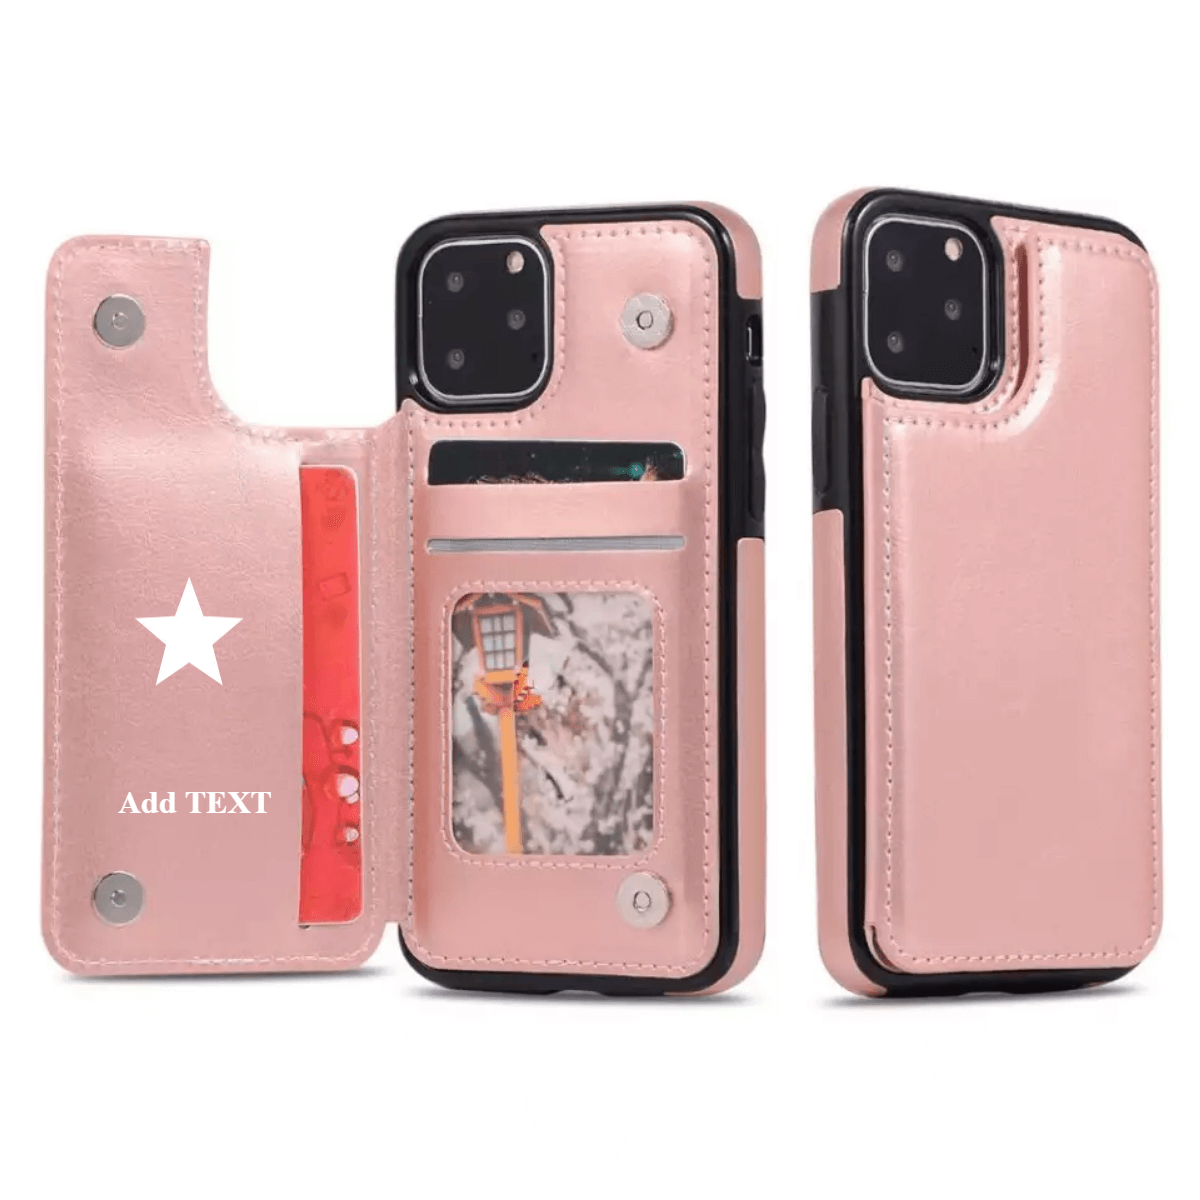 Luxury PU Flip Wallet Leather Case for iPhone XS Max XR 10 Multi Card Holders Phone Cases for iPhone X 6 6s 7 8 Plus